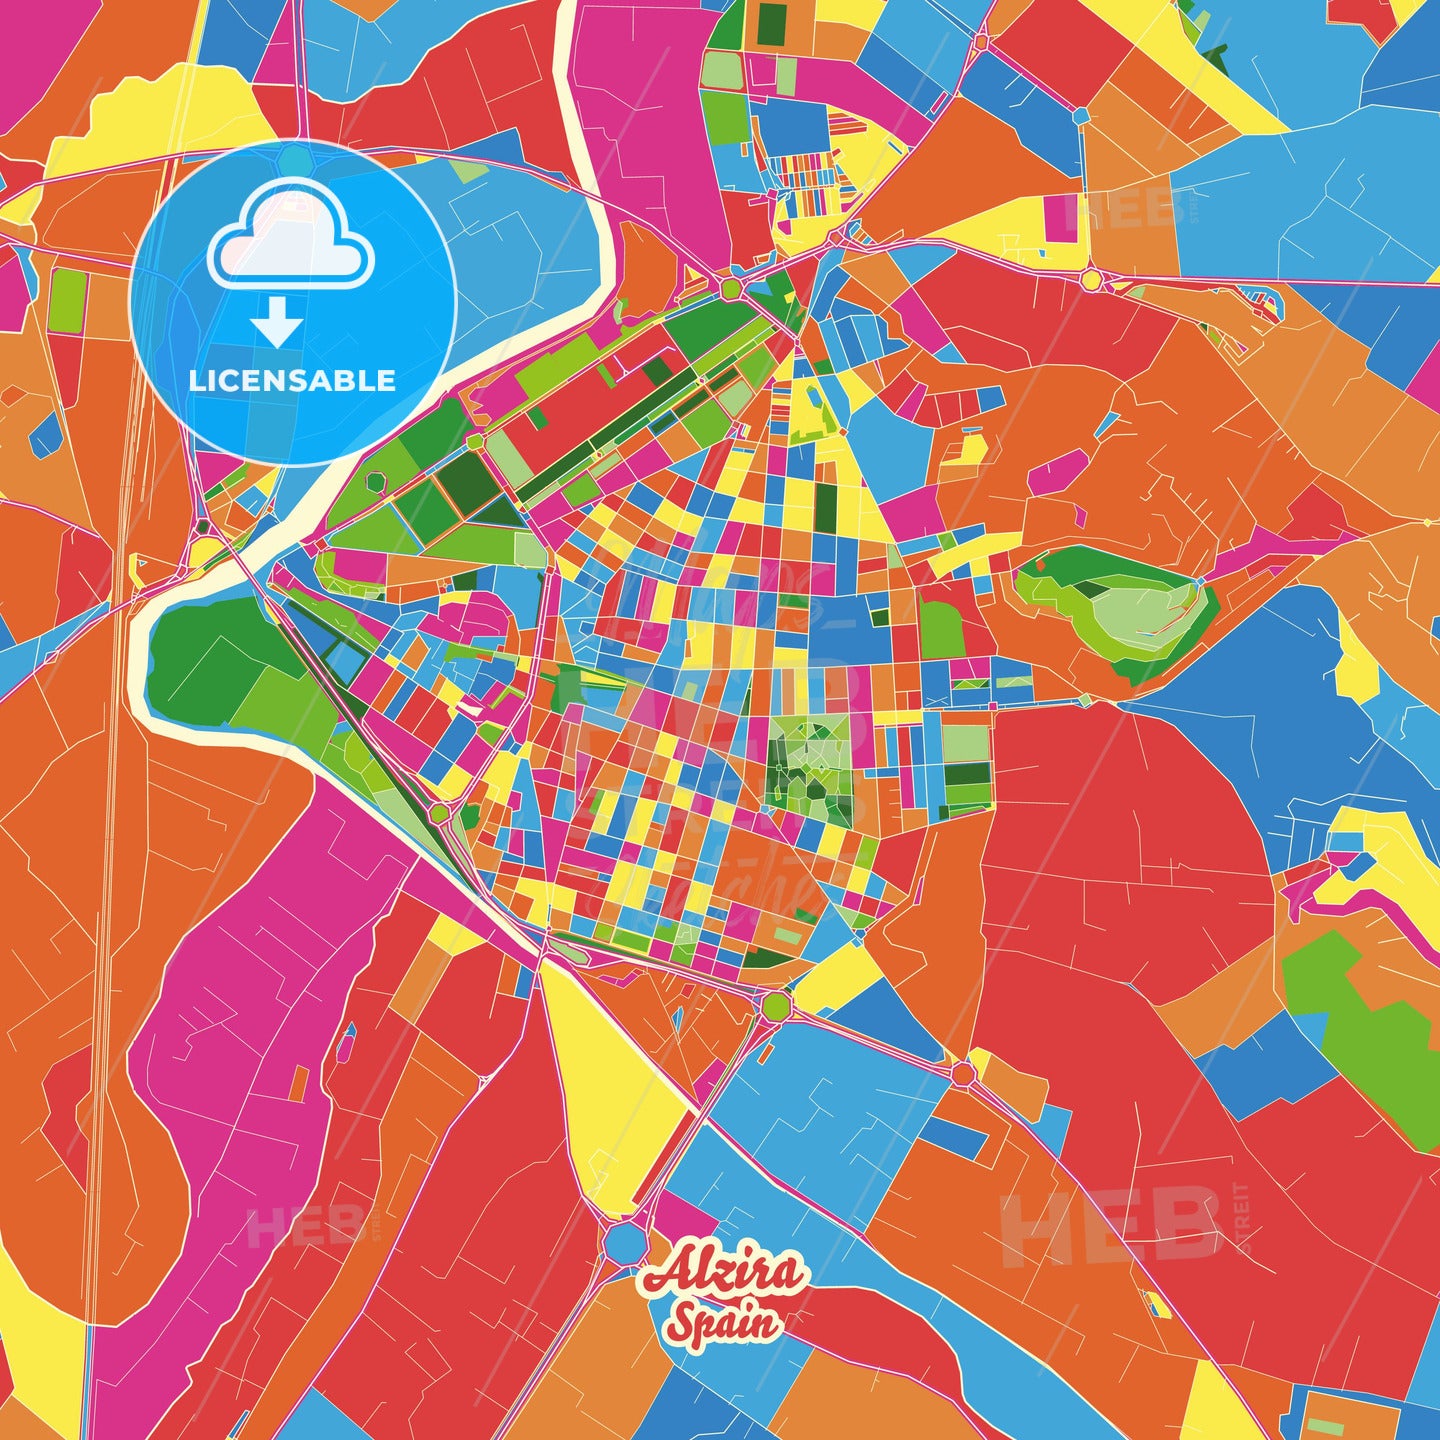 Alzira, Spain Crazy Colorful Street Map Poster Template - HEBSTREITS Sketches